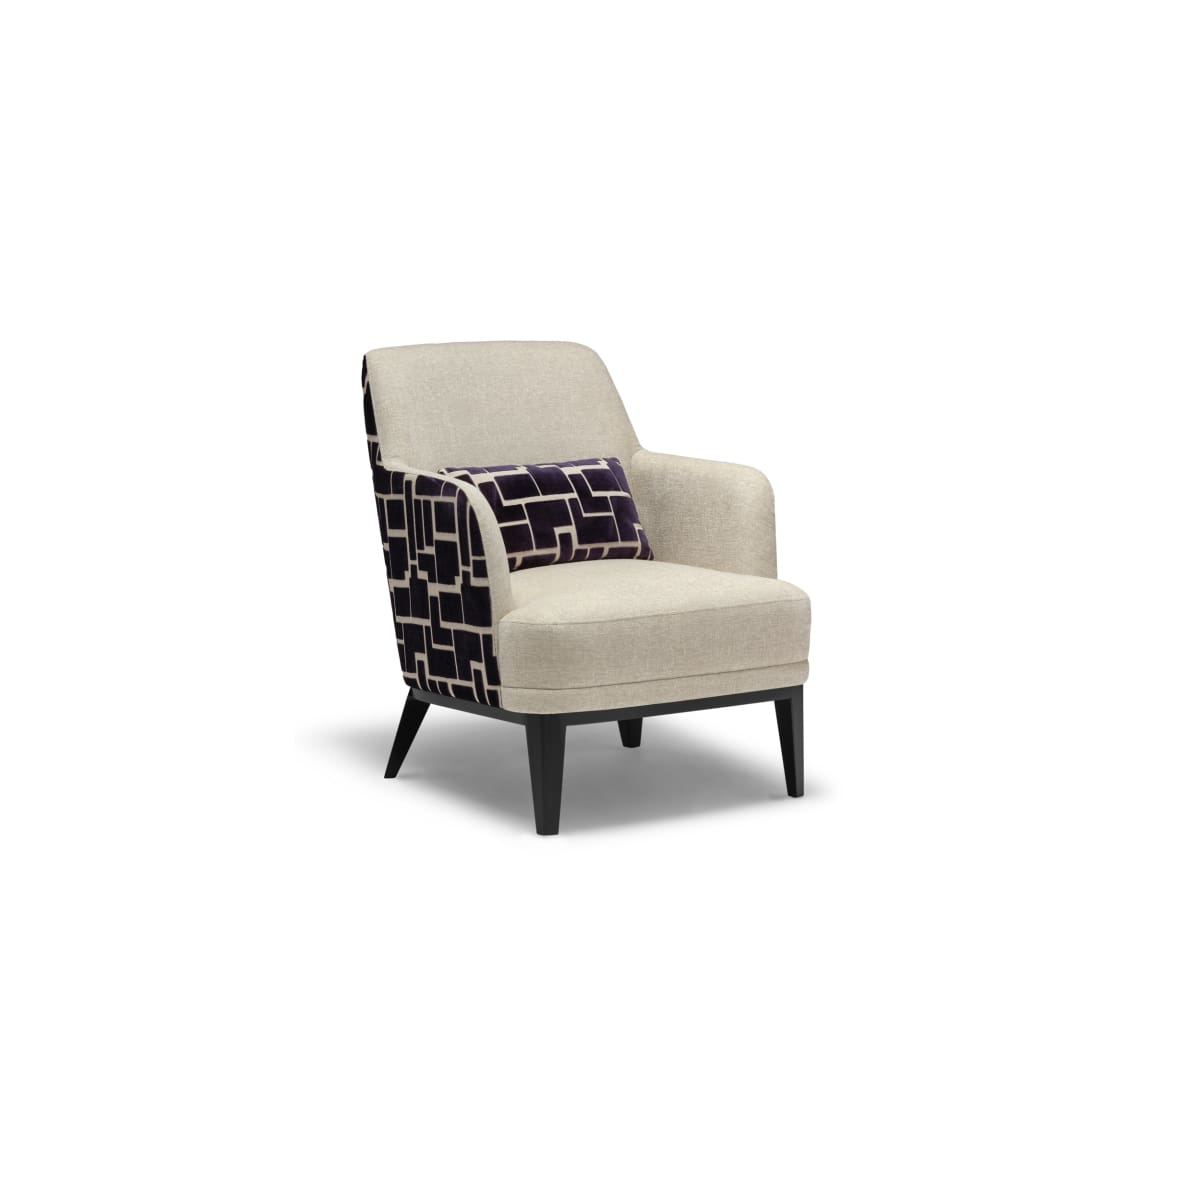 Kass Chair - accent chairs